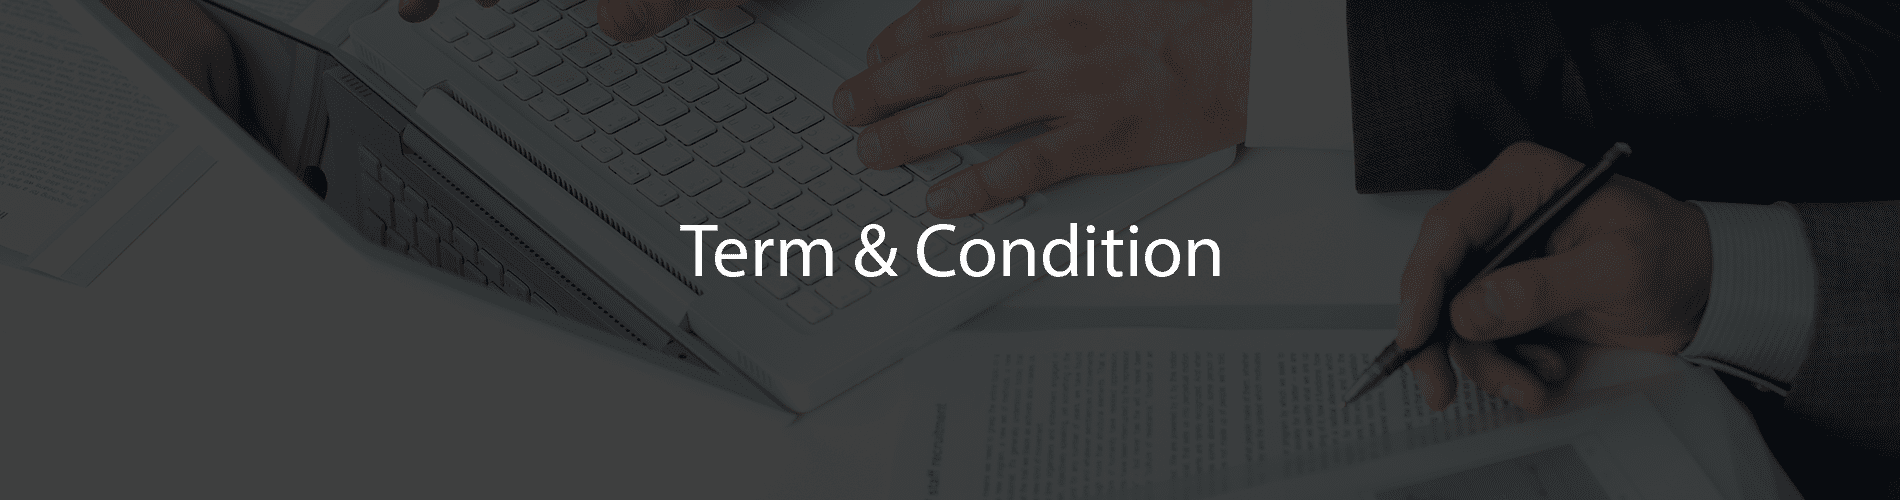 Legacy Networks Terms and Condition